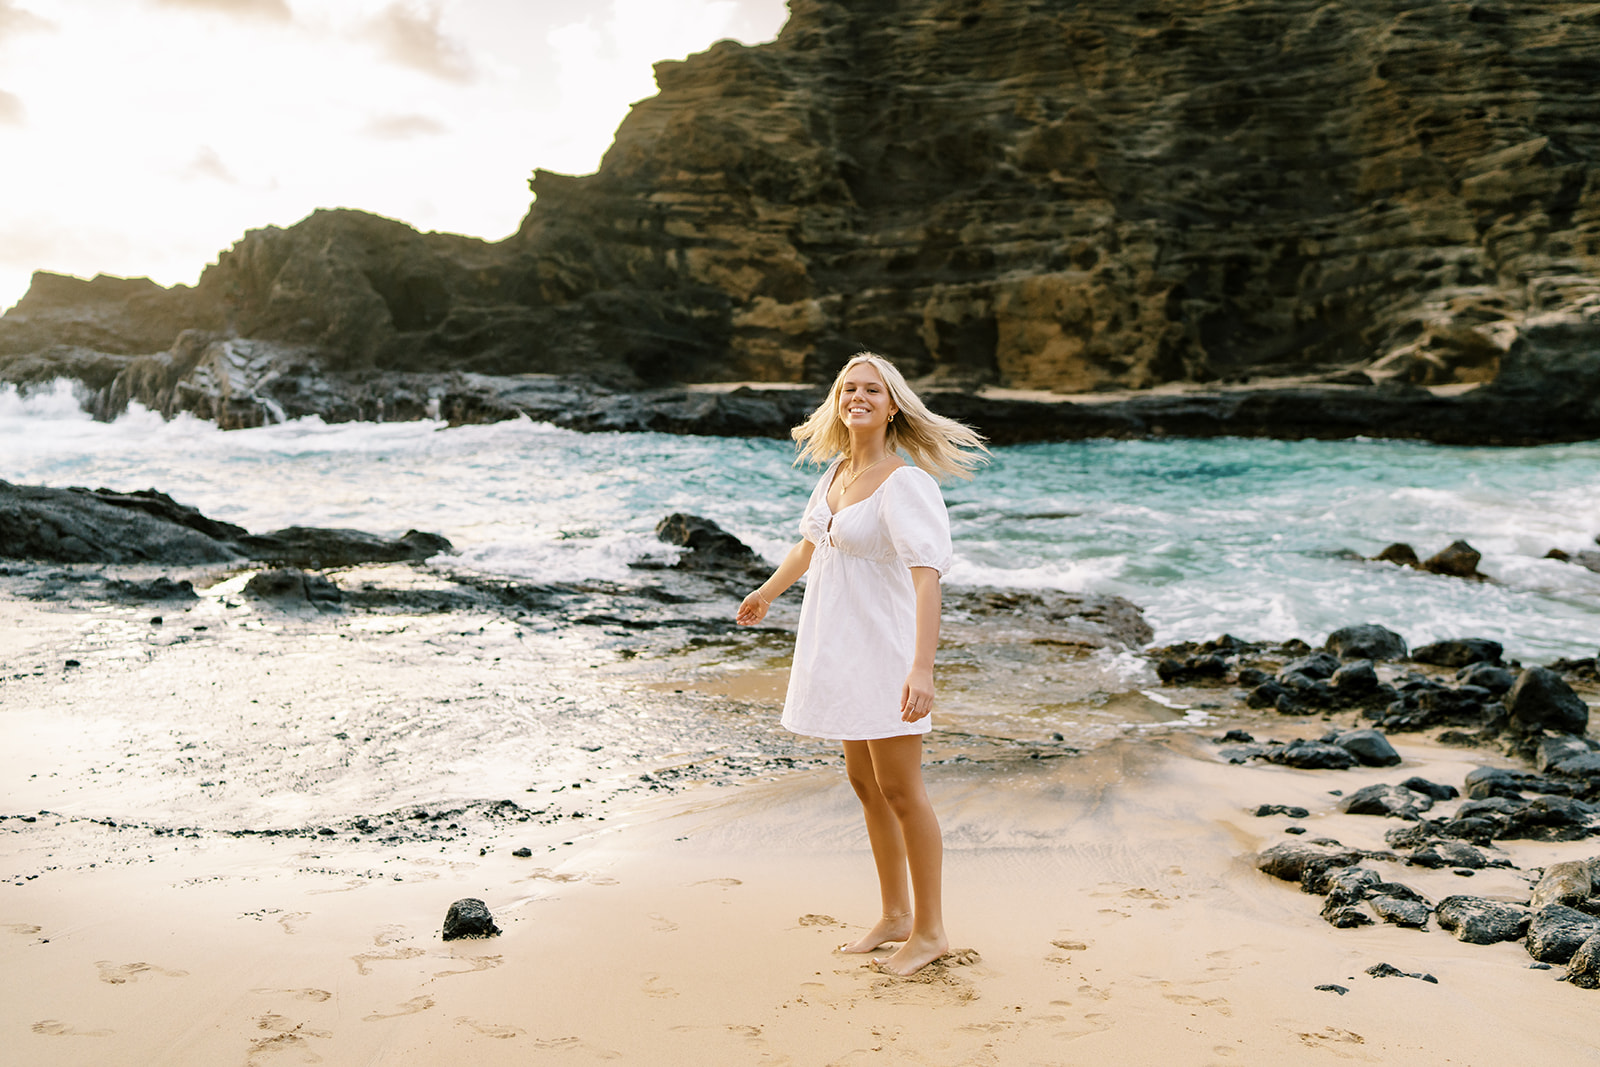 A high school senior in a white dress playing around by herself at Halona Cove in Oahu